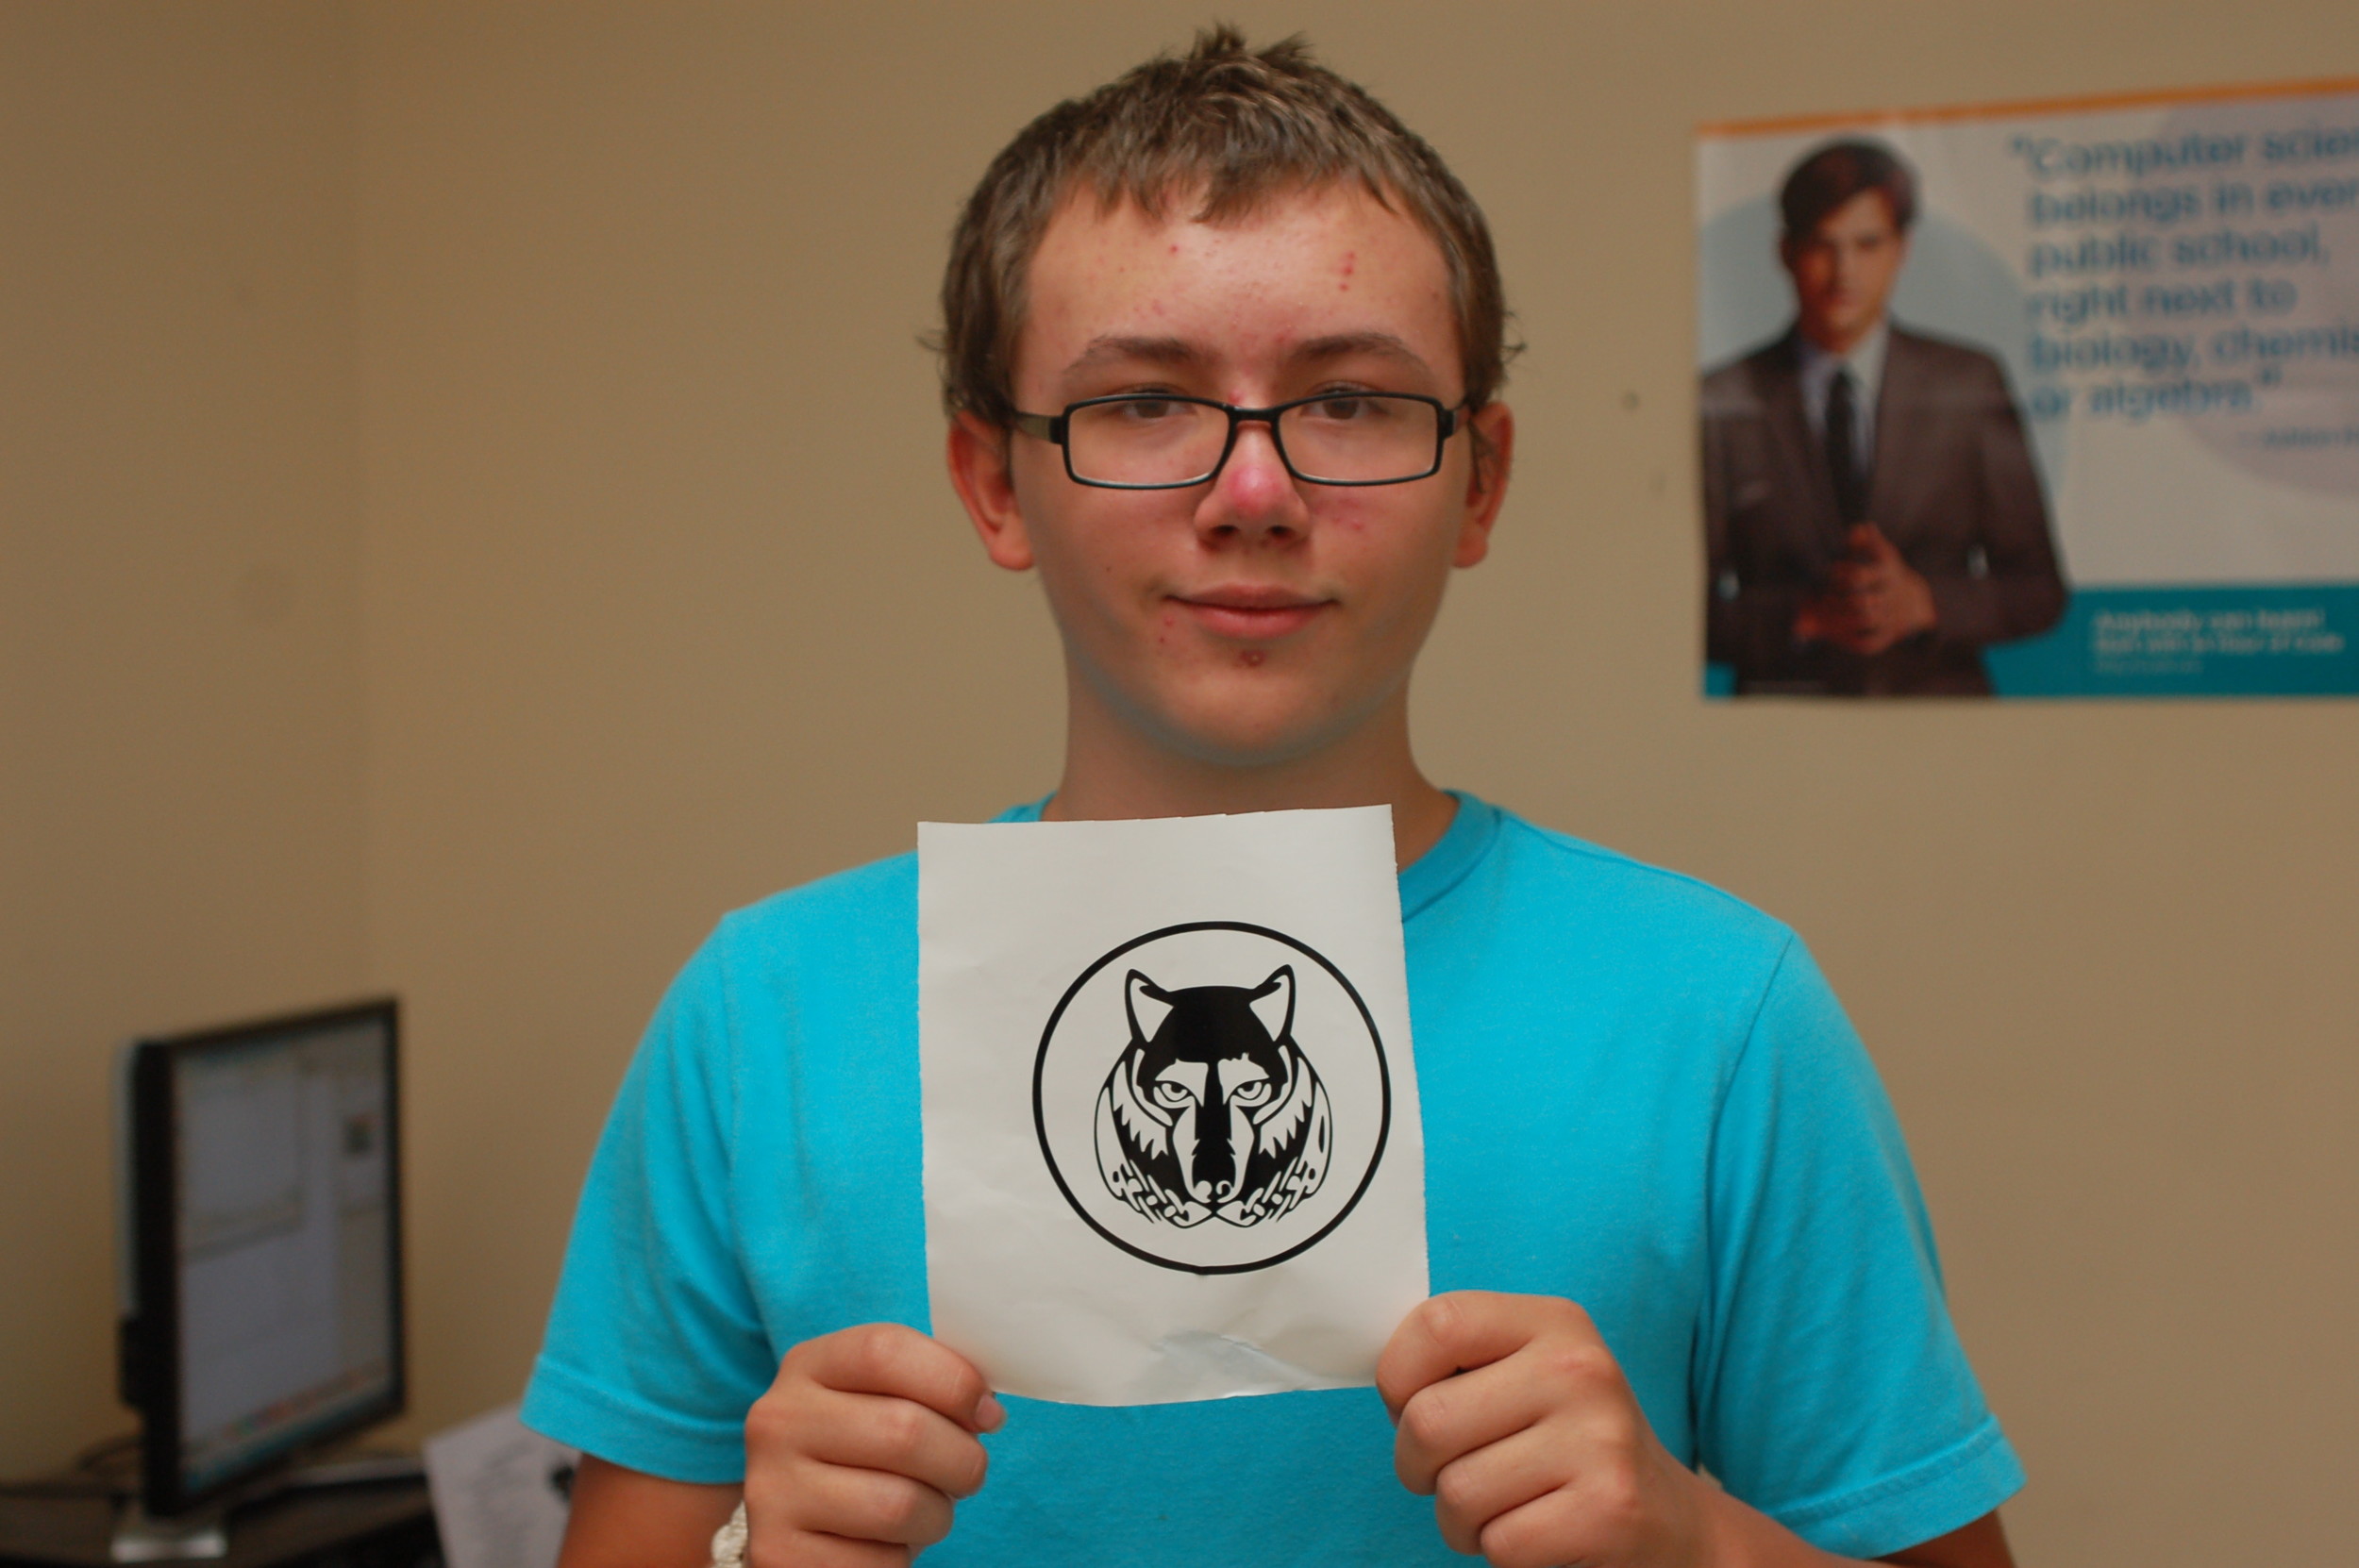 Lucian Sullivan, an 8th grader at Thompson Middle School in Newport, shows off the wolf sticker he made in Amie Shinego's technology class.